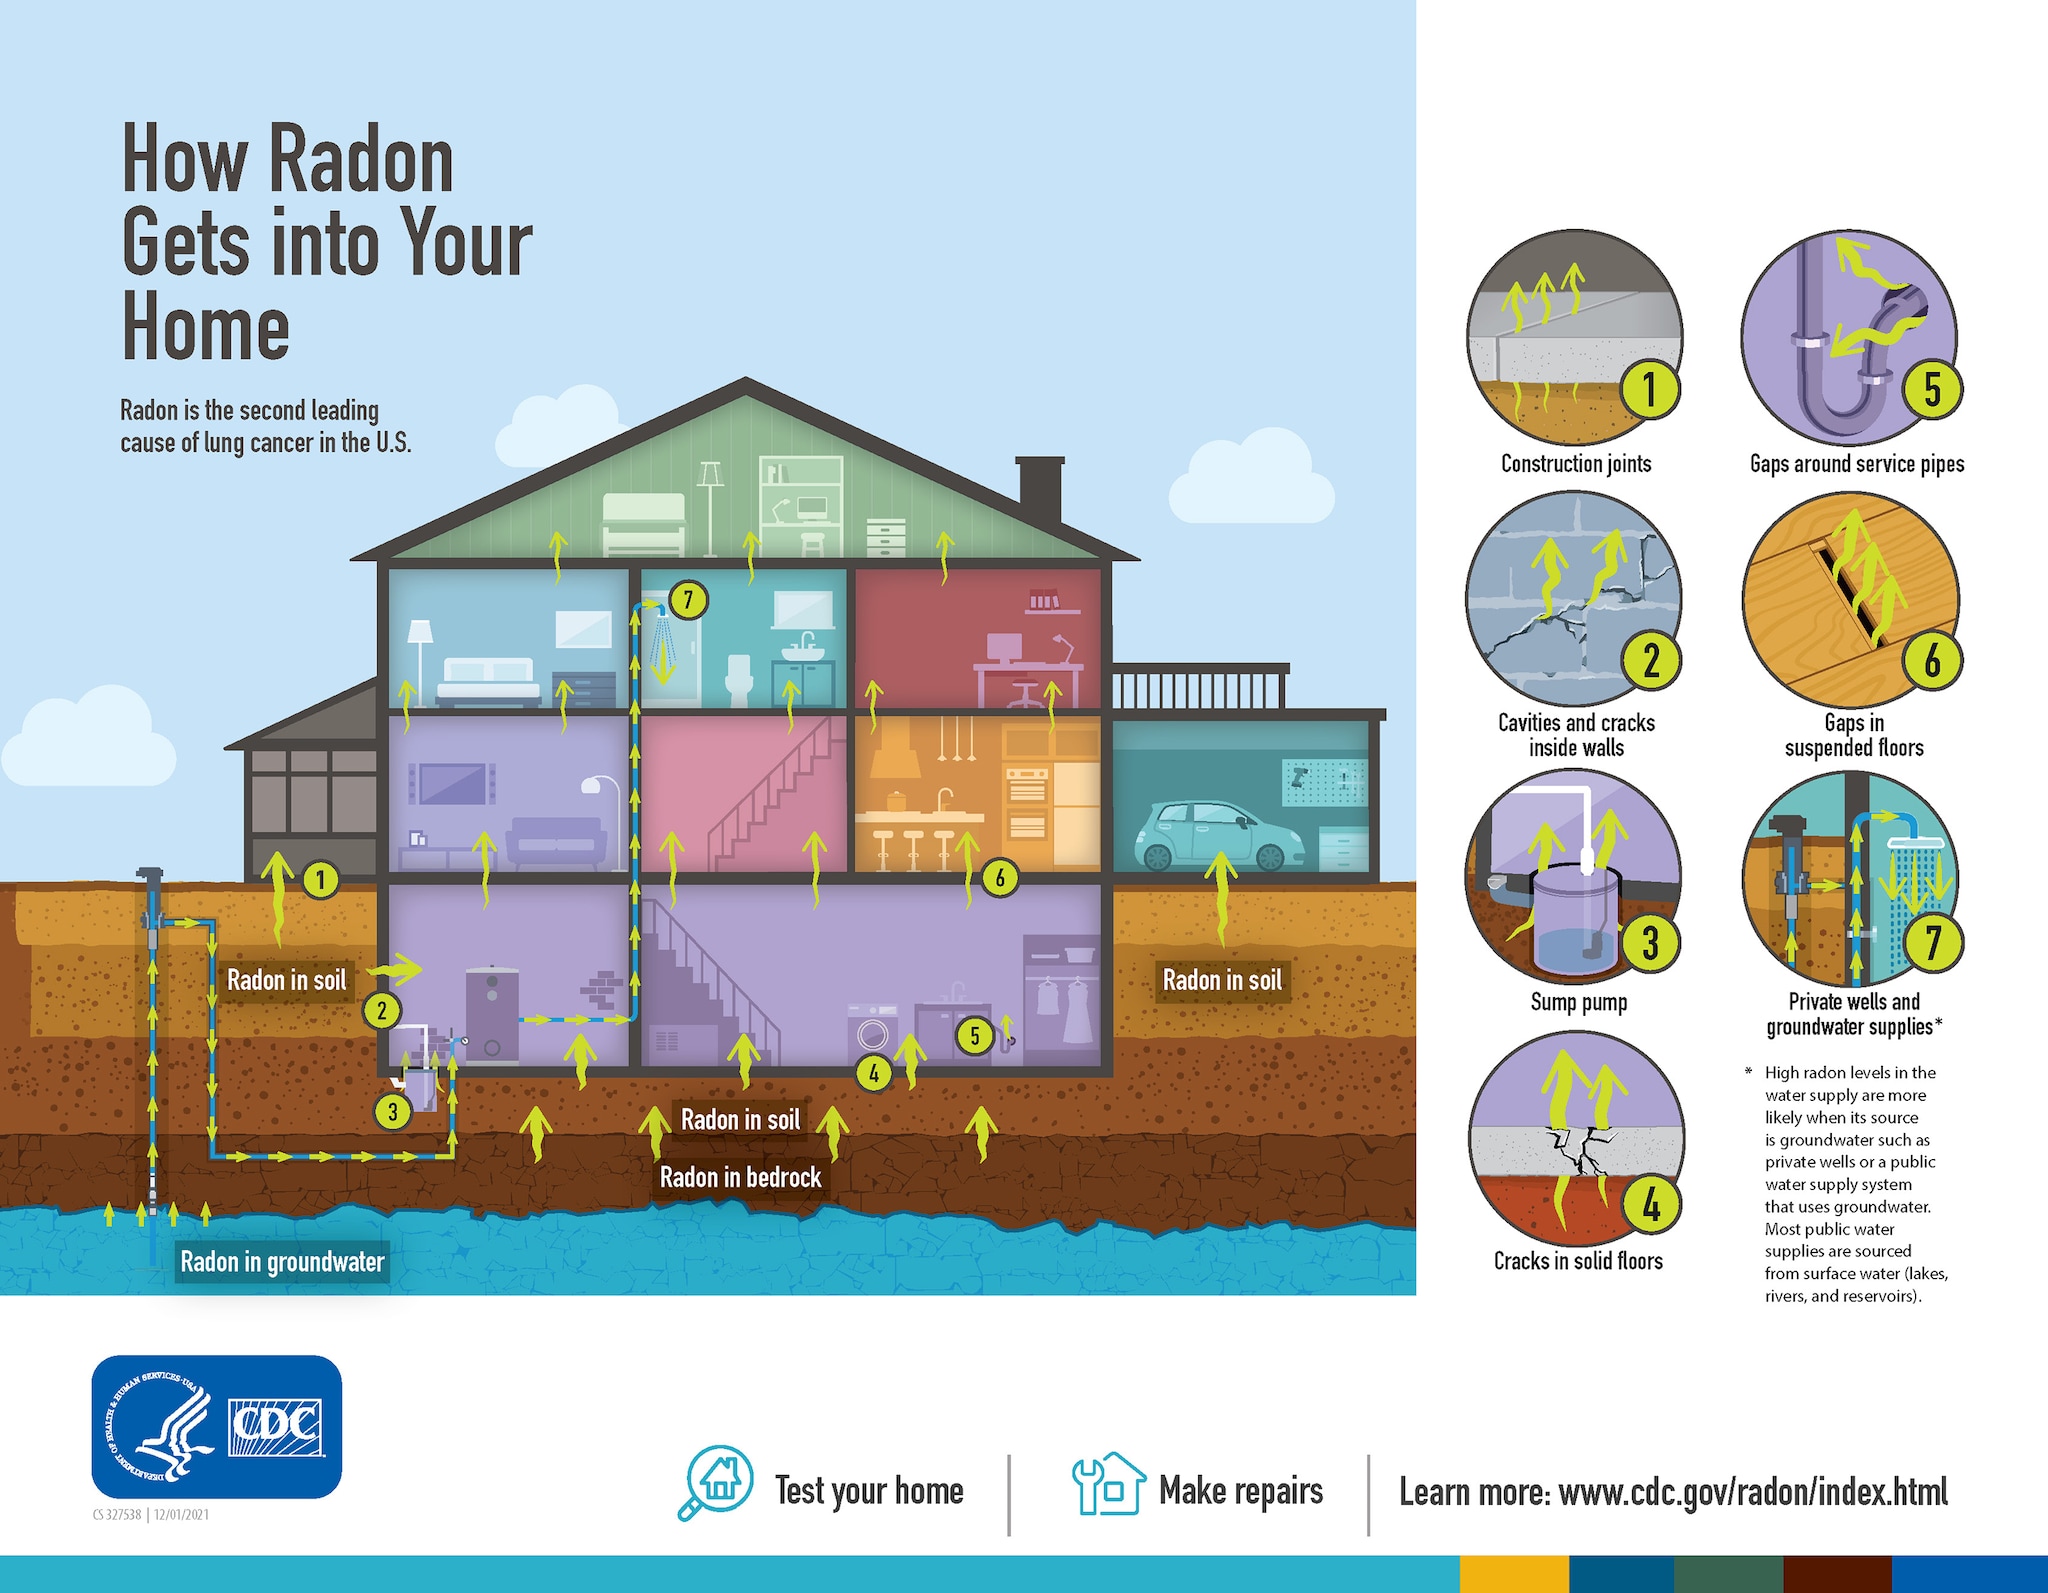 What You Should Know About Radon Gas - Affordable Radon